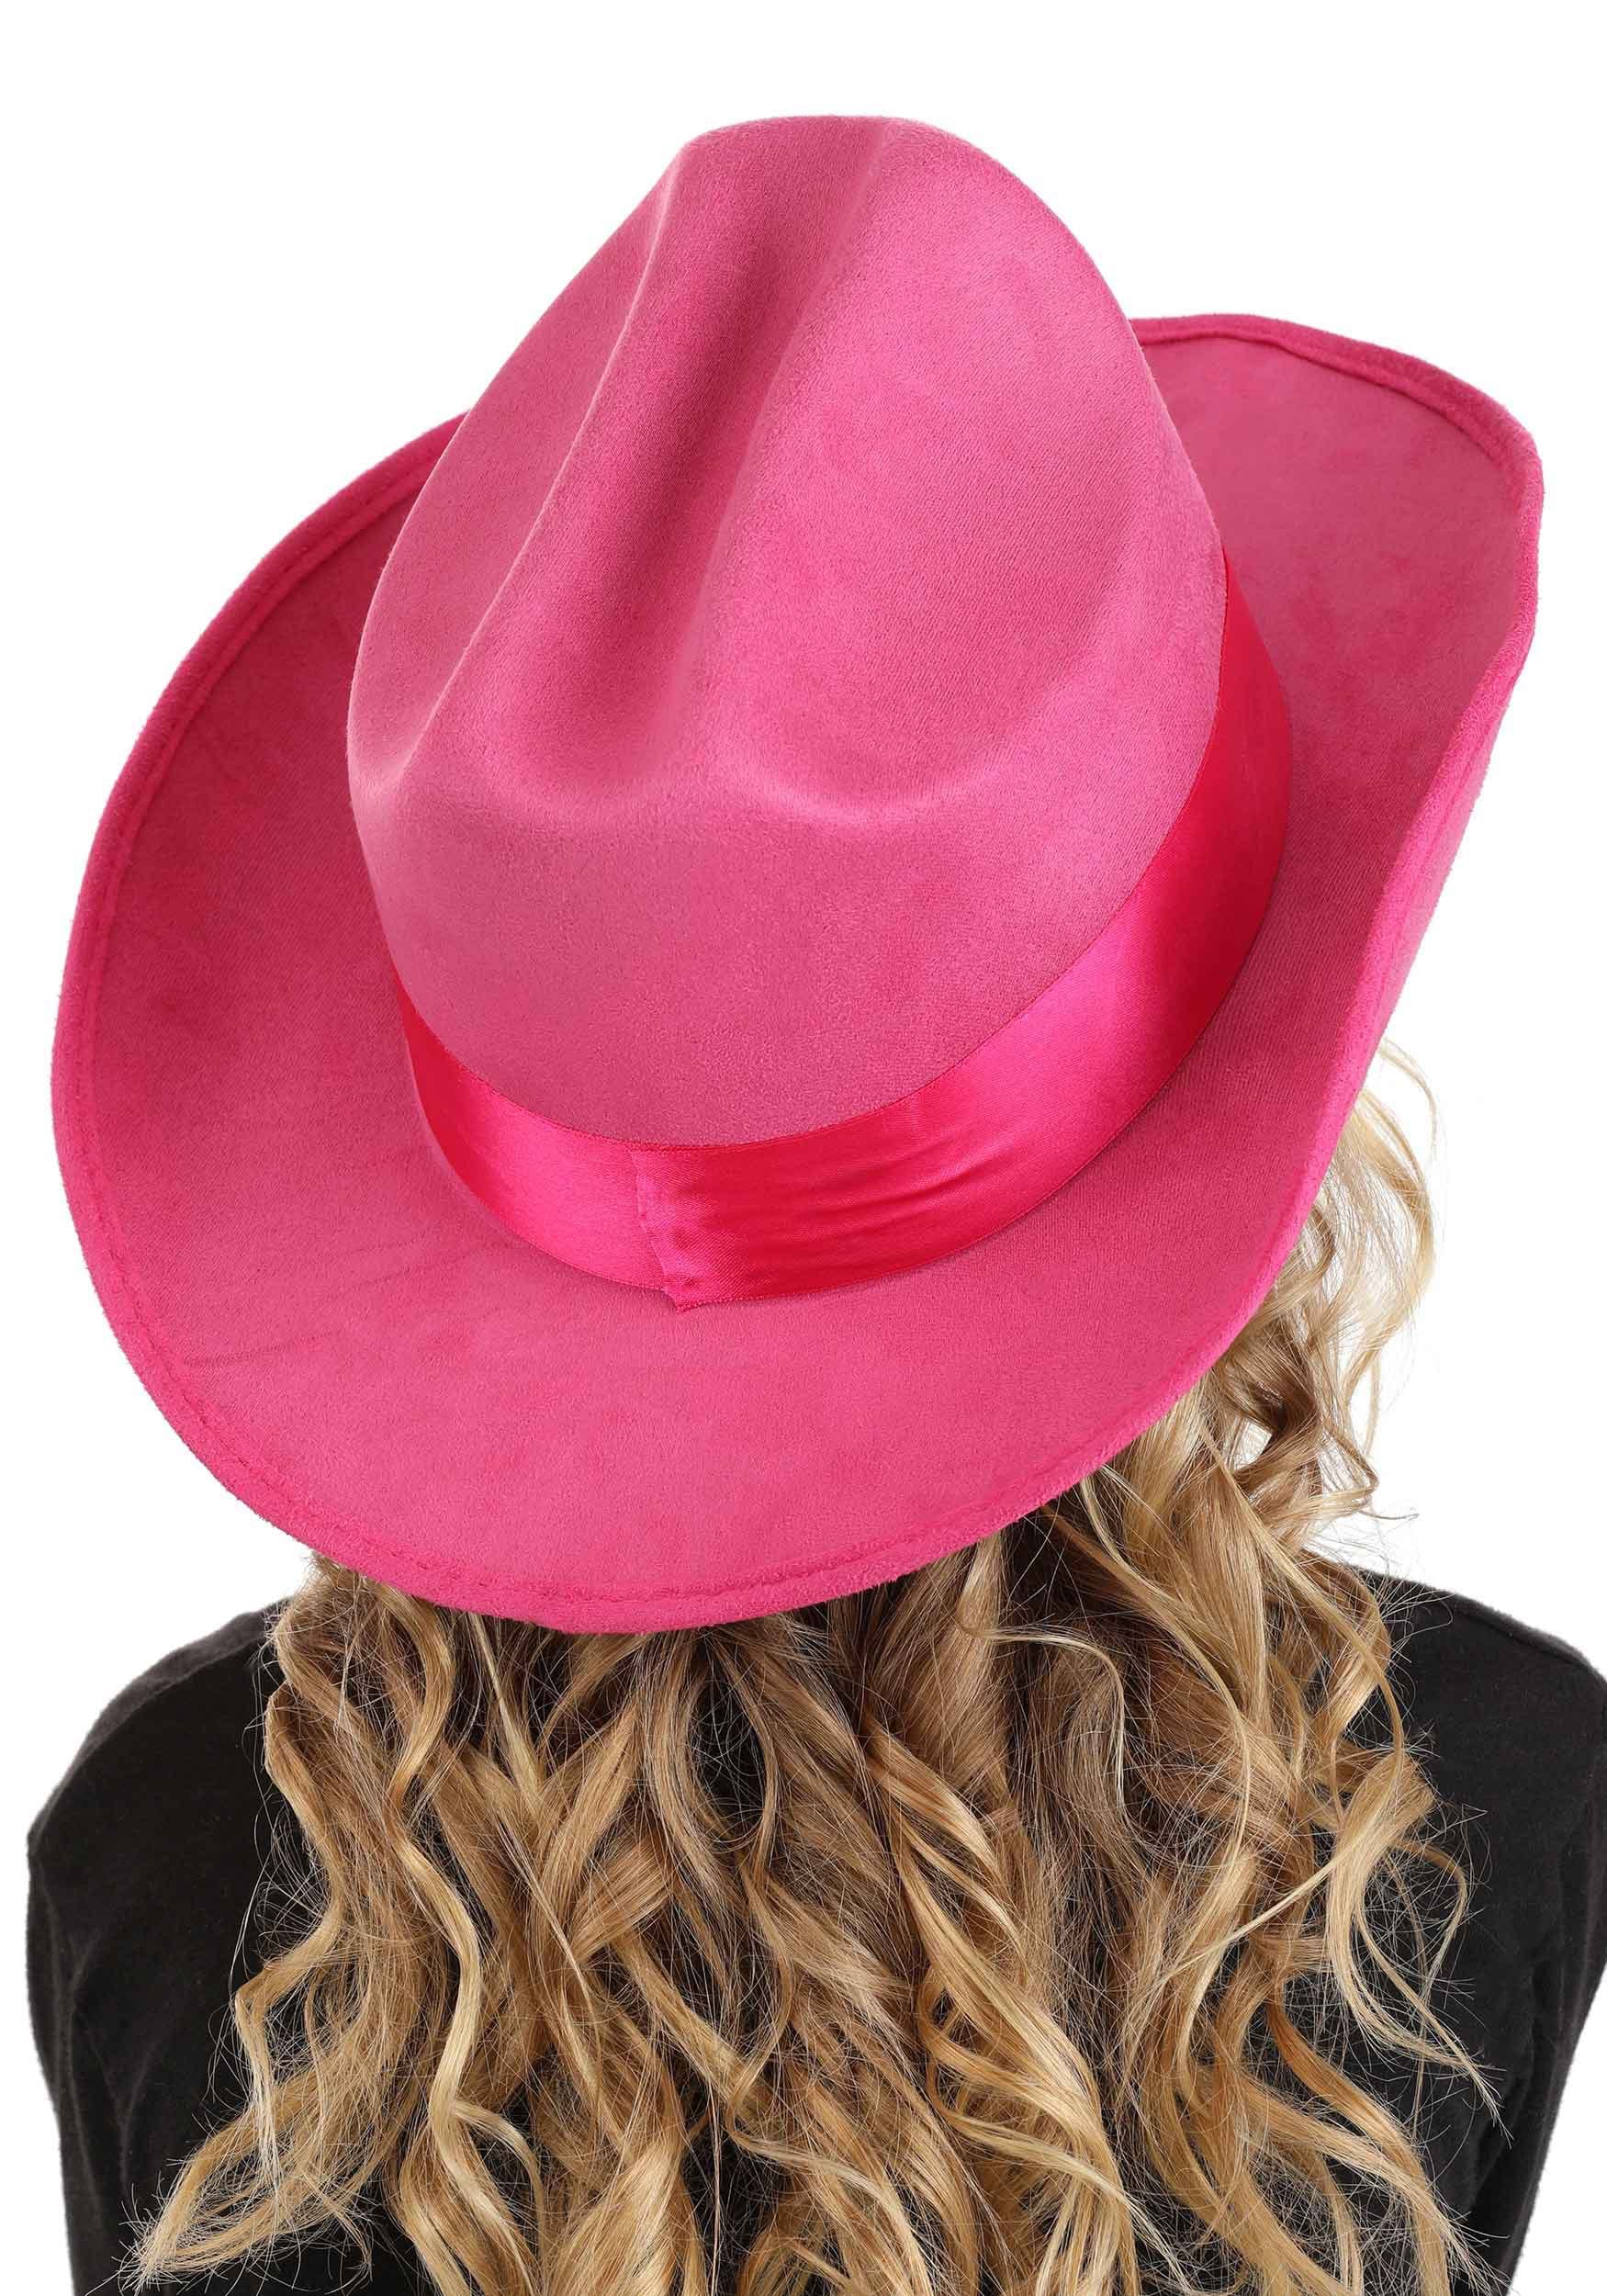 Girl's Pink Cowgirl Hat